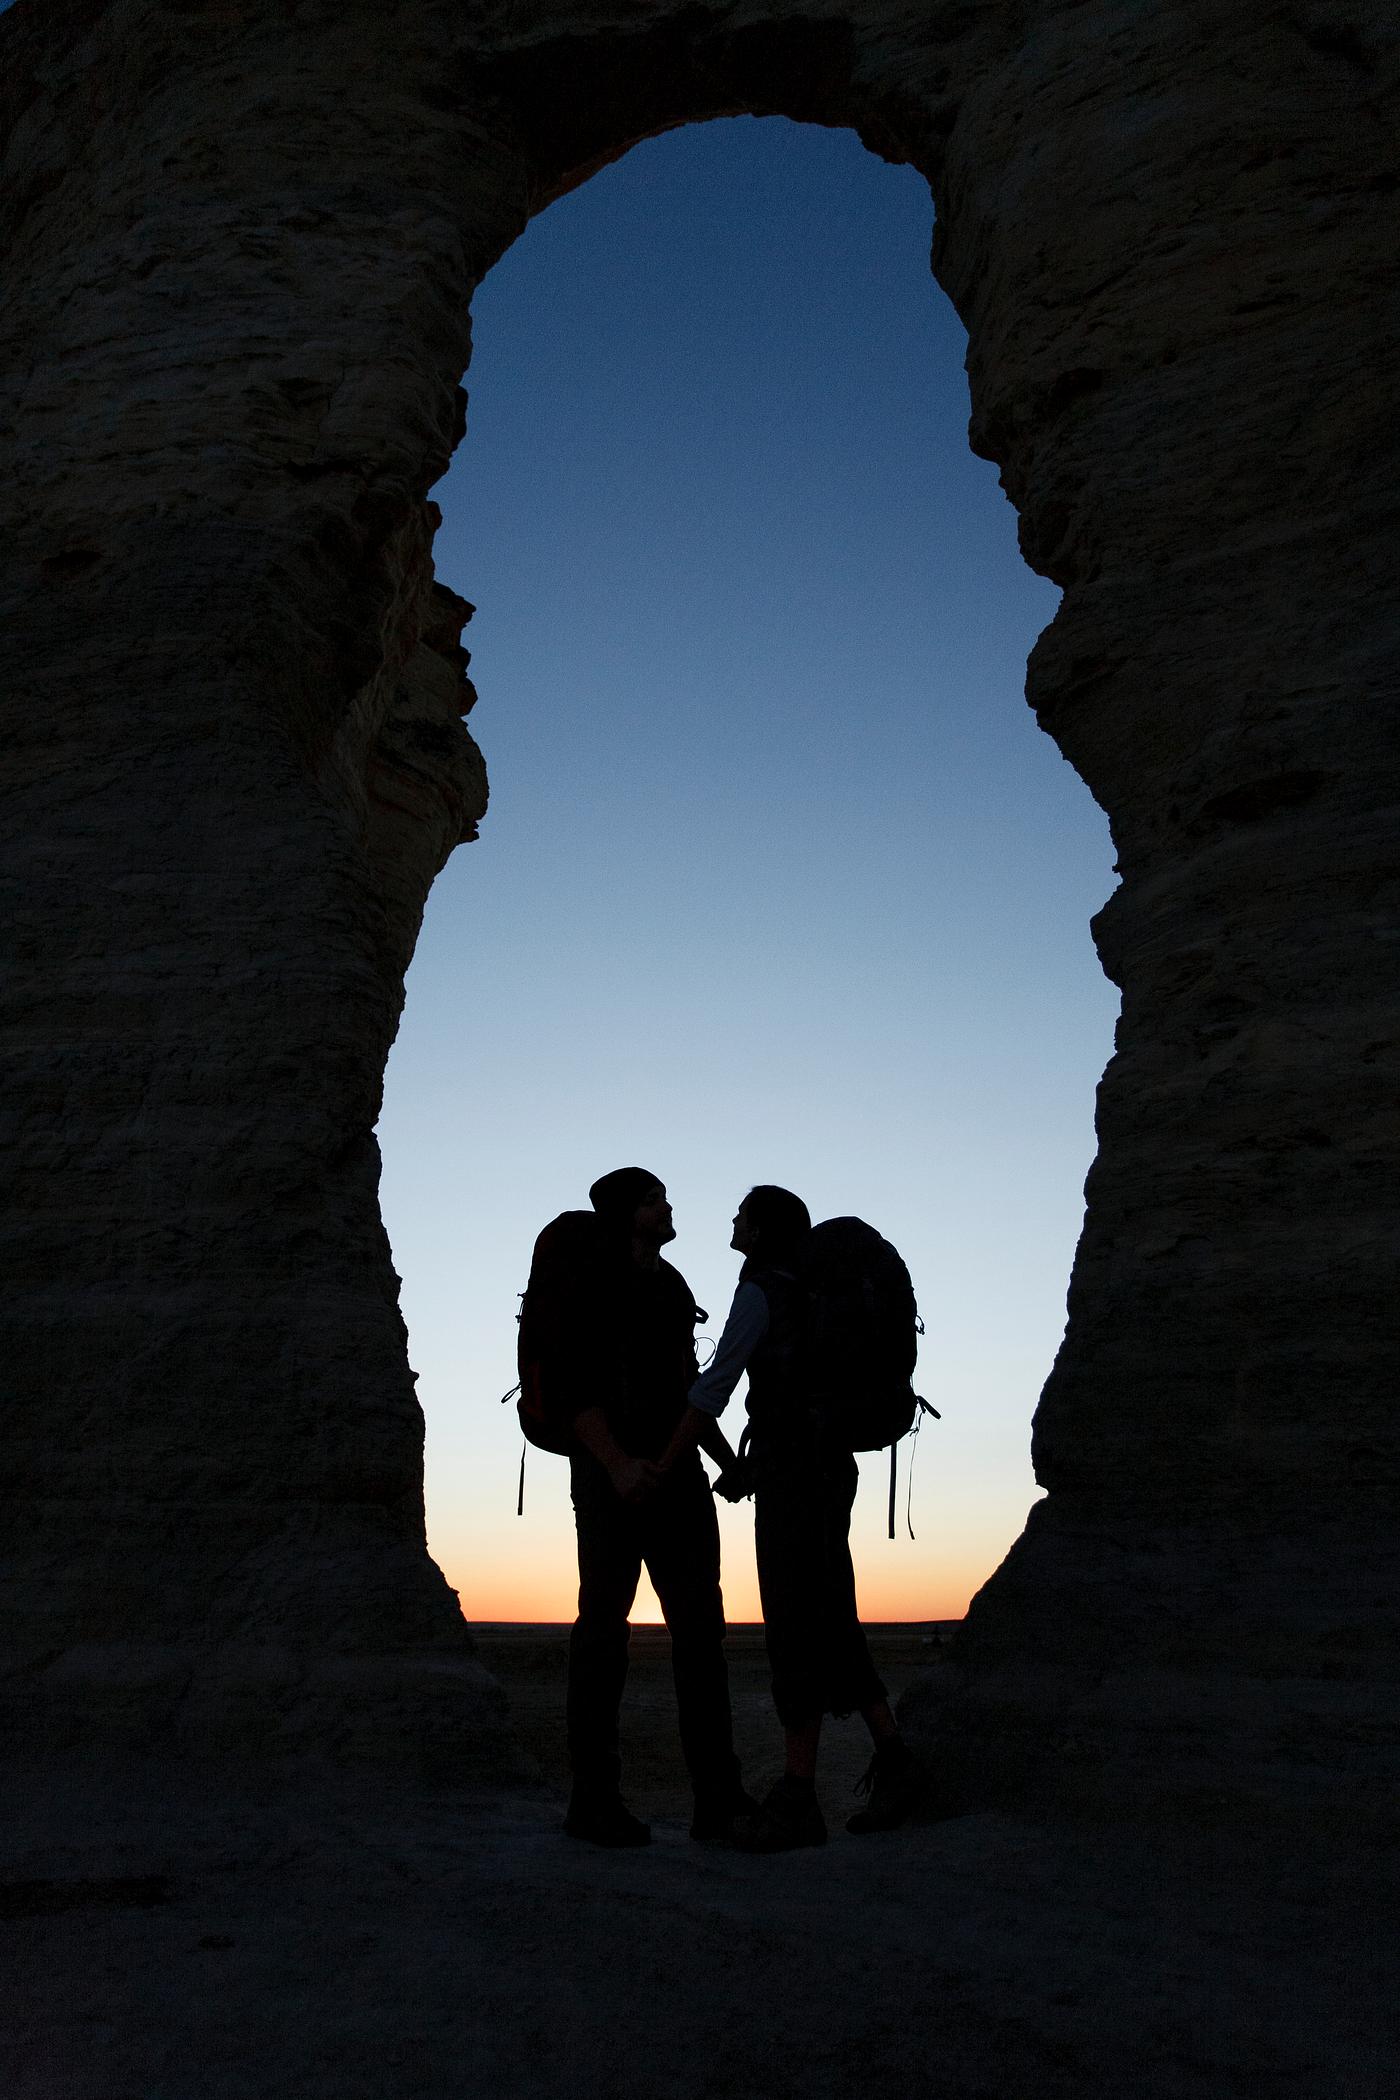 Download Silhouette of couple hiking | Royalty free stock photo ...